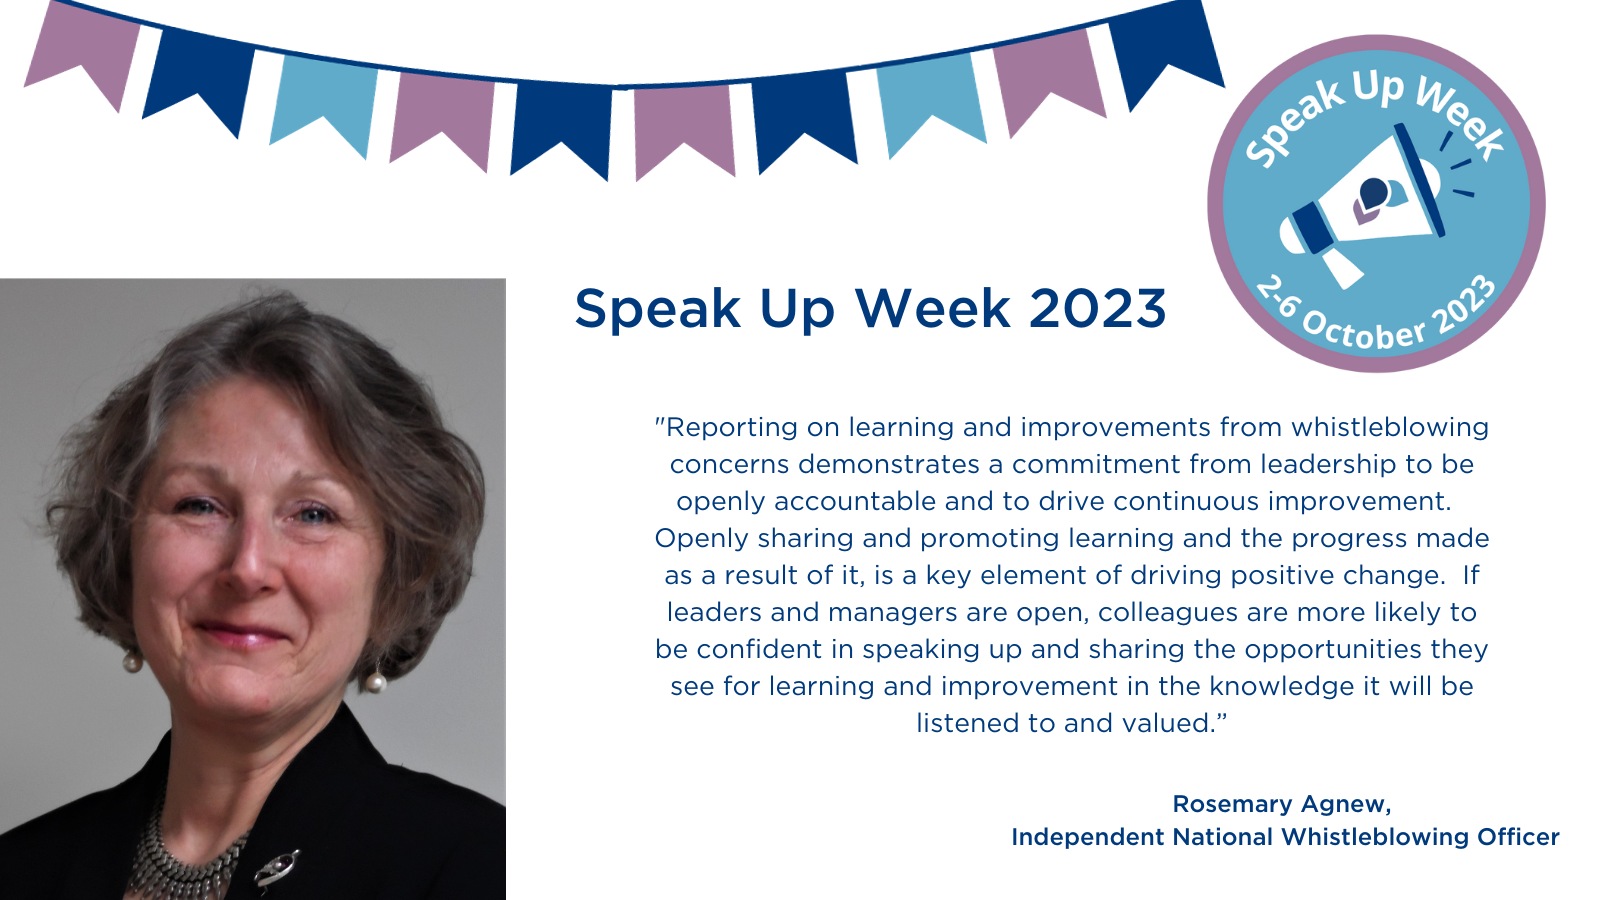 A statement from the INWO, Rosemary Agnew: "Reporting on learning and improvements from whistleblowing concerns demonstrates a commitment from leadership to be openly accountable and to drive continuous improvement.  Openly sharing and promoting learning and the progress made as a result of it, is a key element of driving positive change.  If leaders and managers are open, colleagues are more likely to be confident in speaking up and sharing the opportunities they see for learning and improvement in the knowledge it will be listened to and valued."